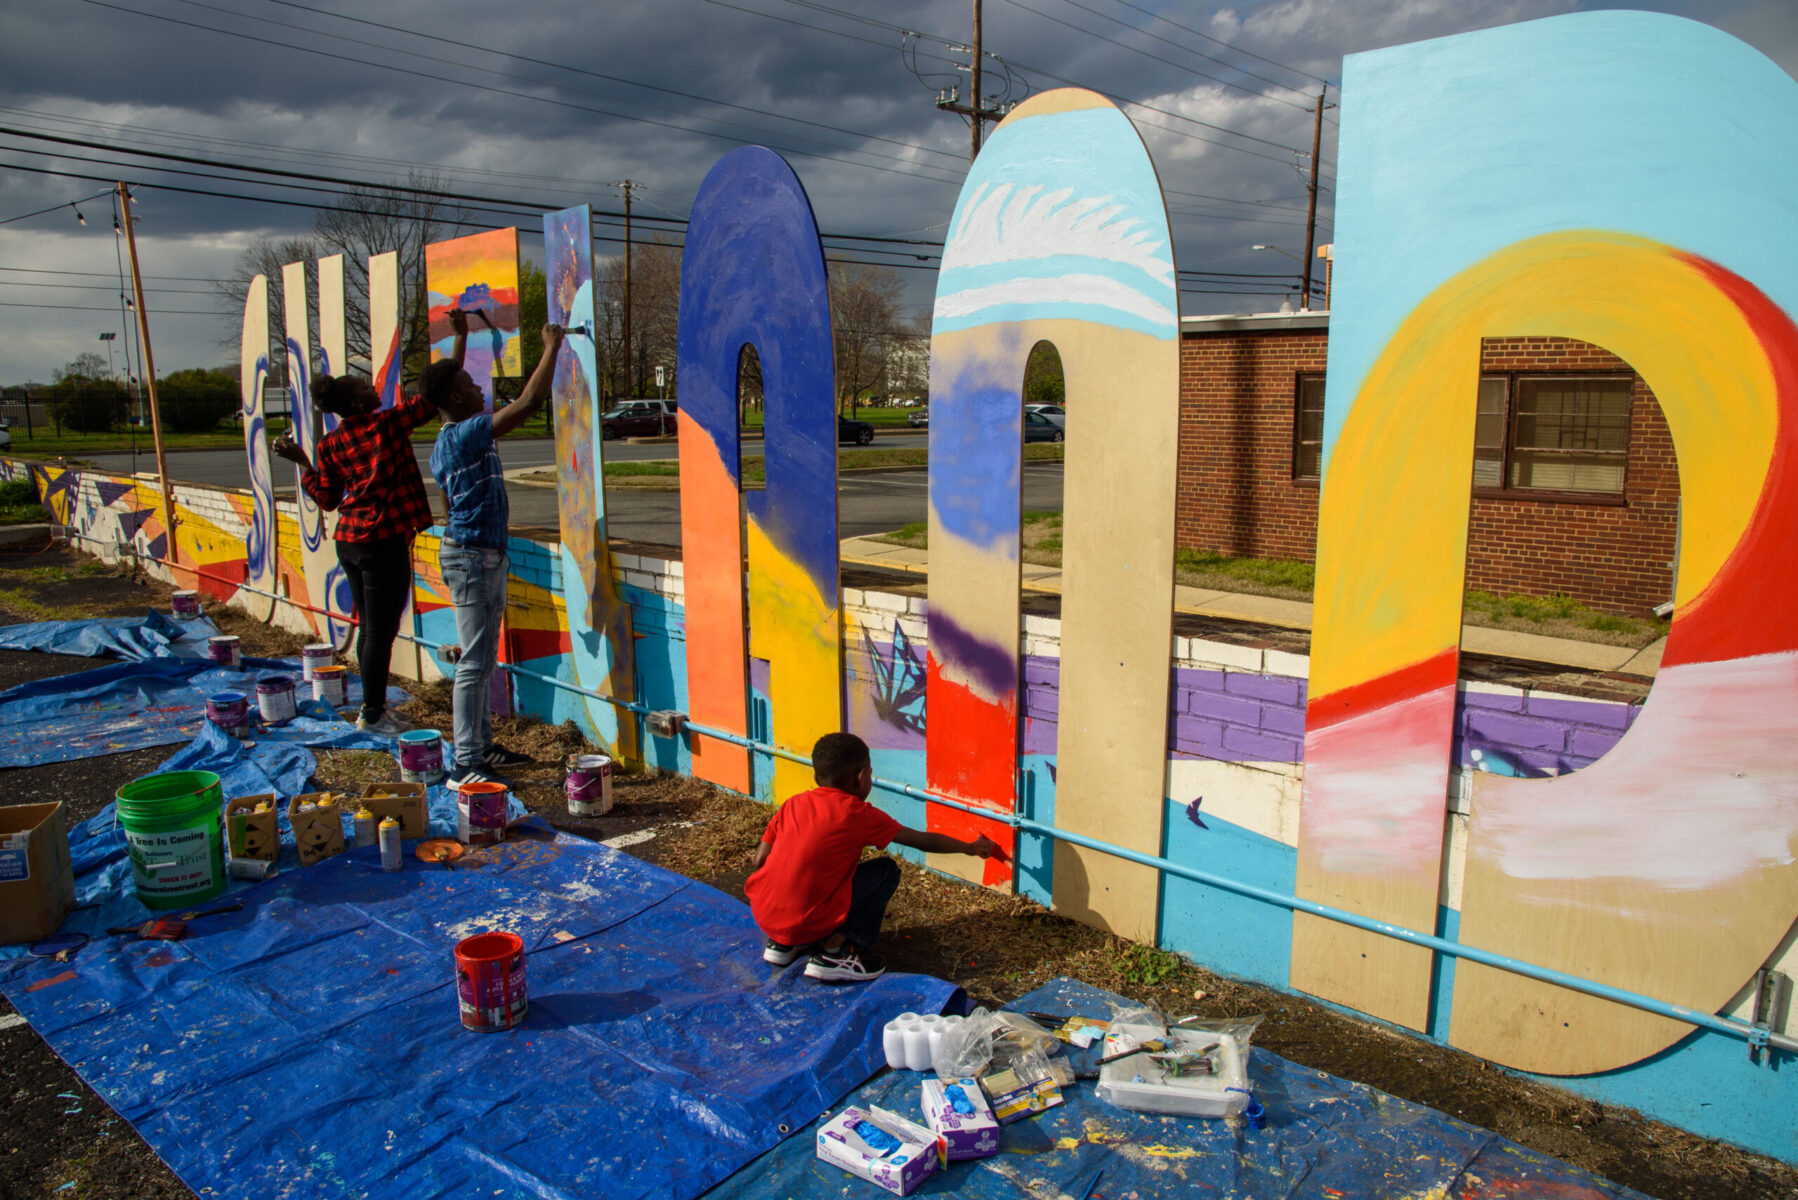 Suitland mural being painted on city name cutouts